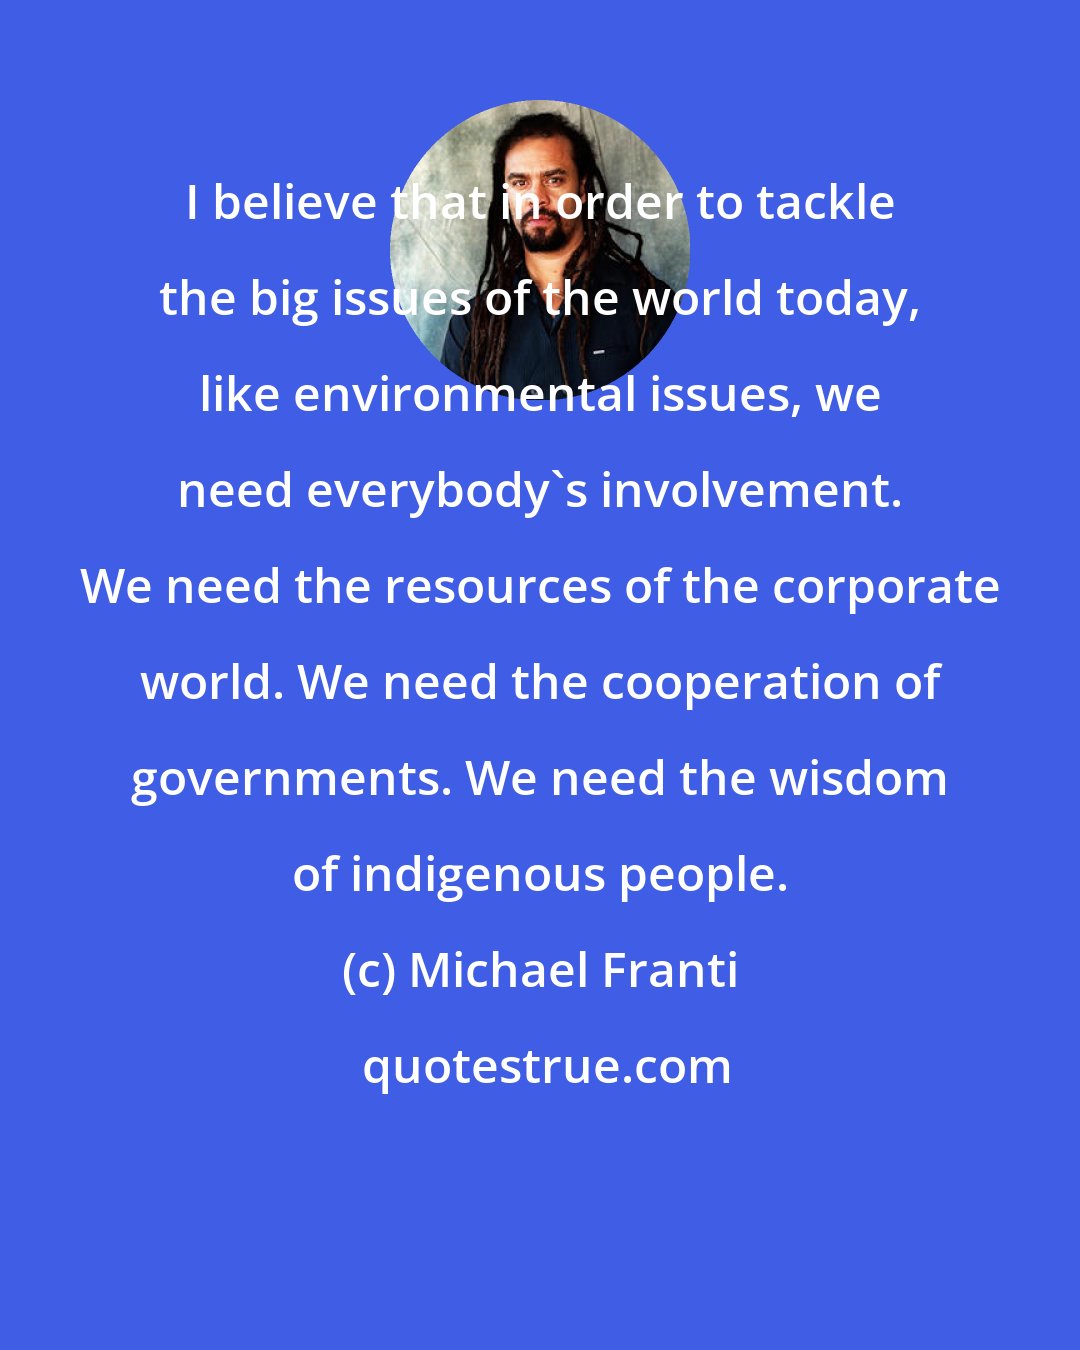 Michael Franti: I believe that in order to tackle the big issues of the world today, like environmental issues, we need everybody's involvement. We need the resources of the corporate world. We need the cooperation of governments. We need the wisdom of indigenous people.